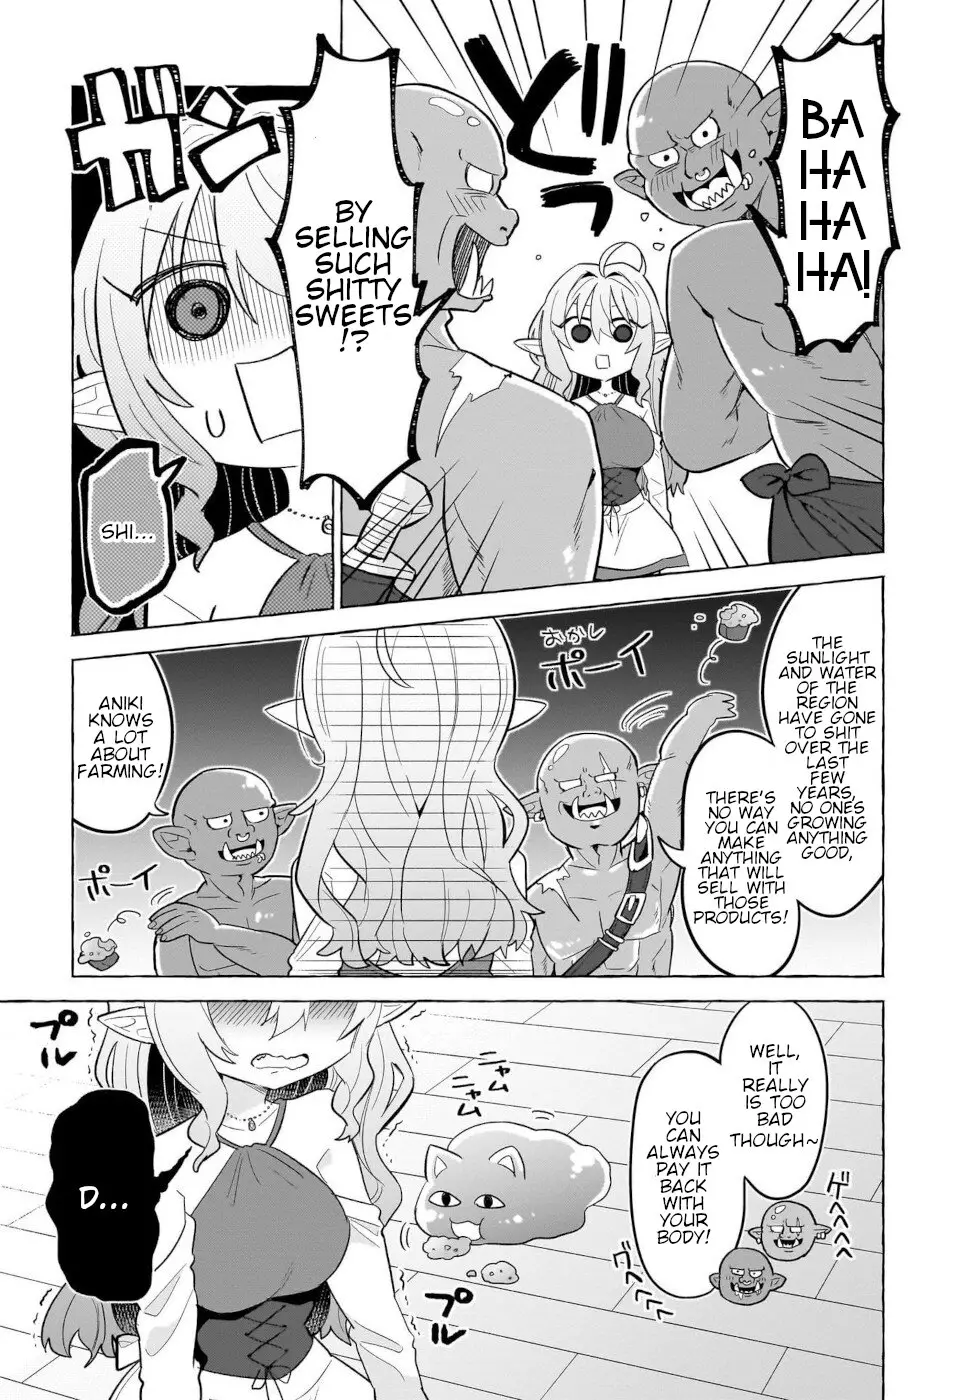 Sweets, Elf, And A High School Girl - 1 page 6-8158d9a9